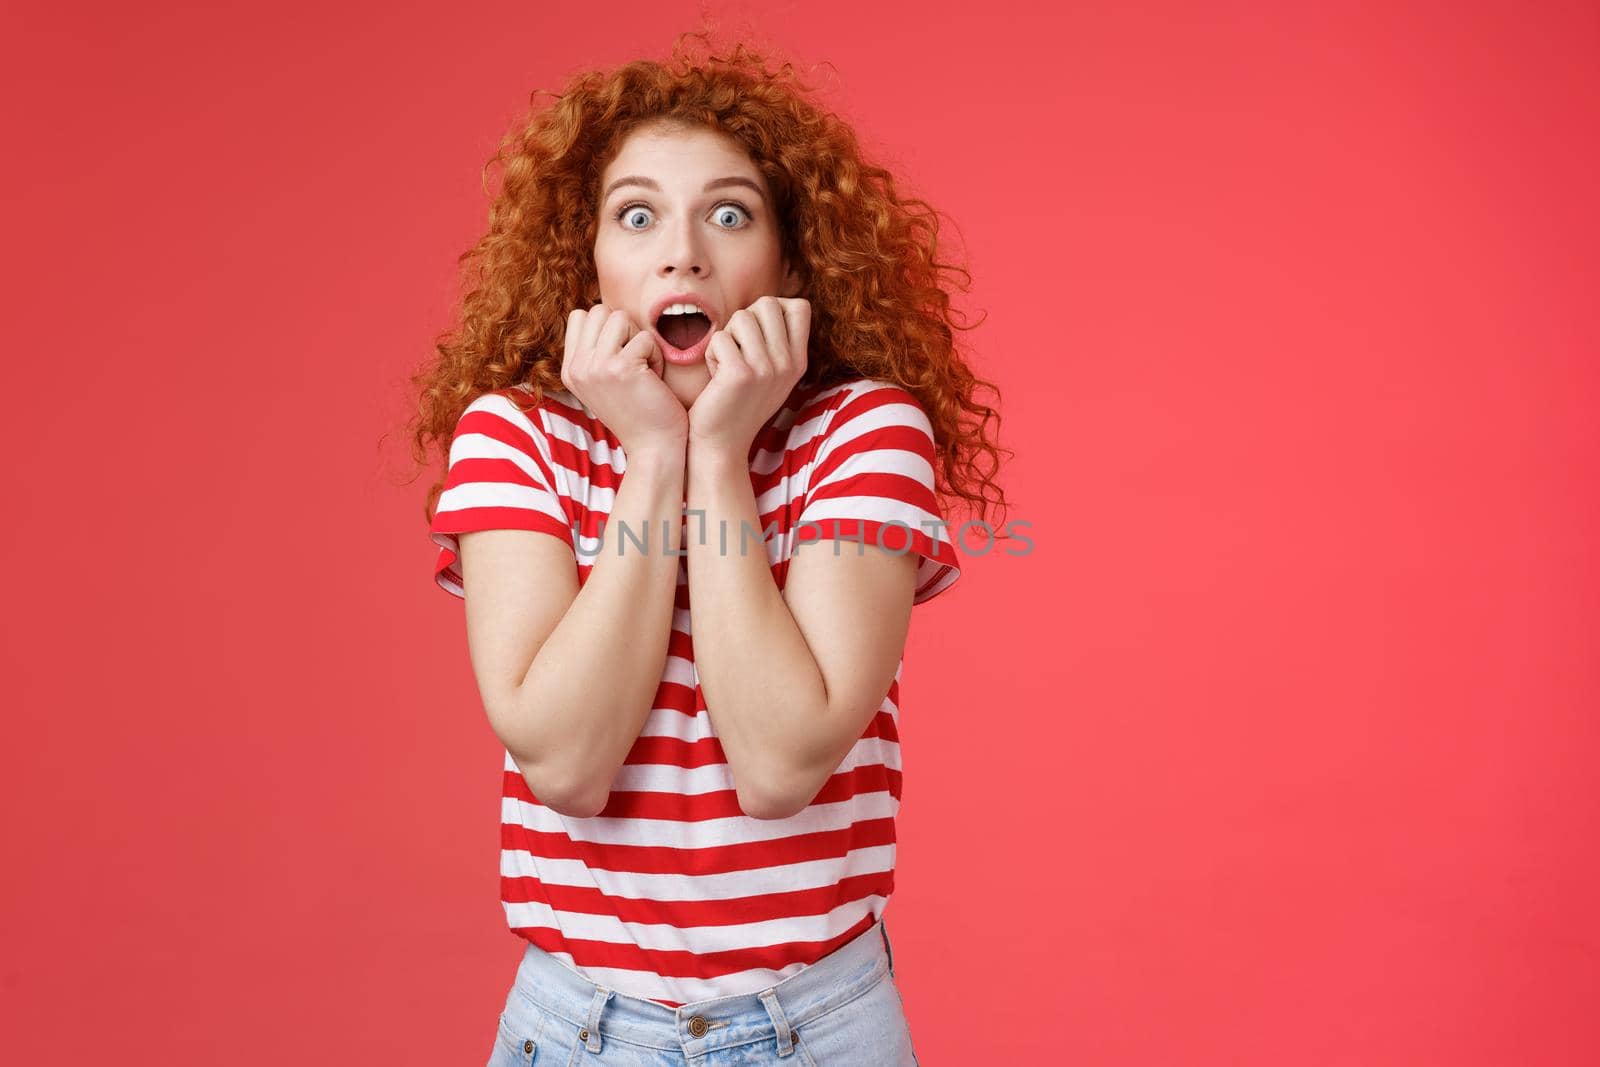 Shocked scared ambushed redhead curly-haired cute girlfriend insecure gasping drop jaw scream frightened stare camera hold hands opened mouth terrified standing stupor red background.